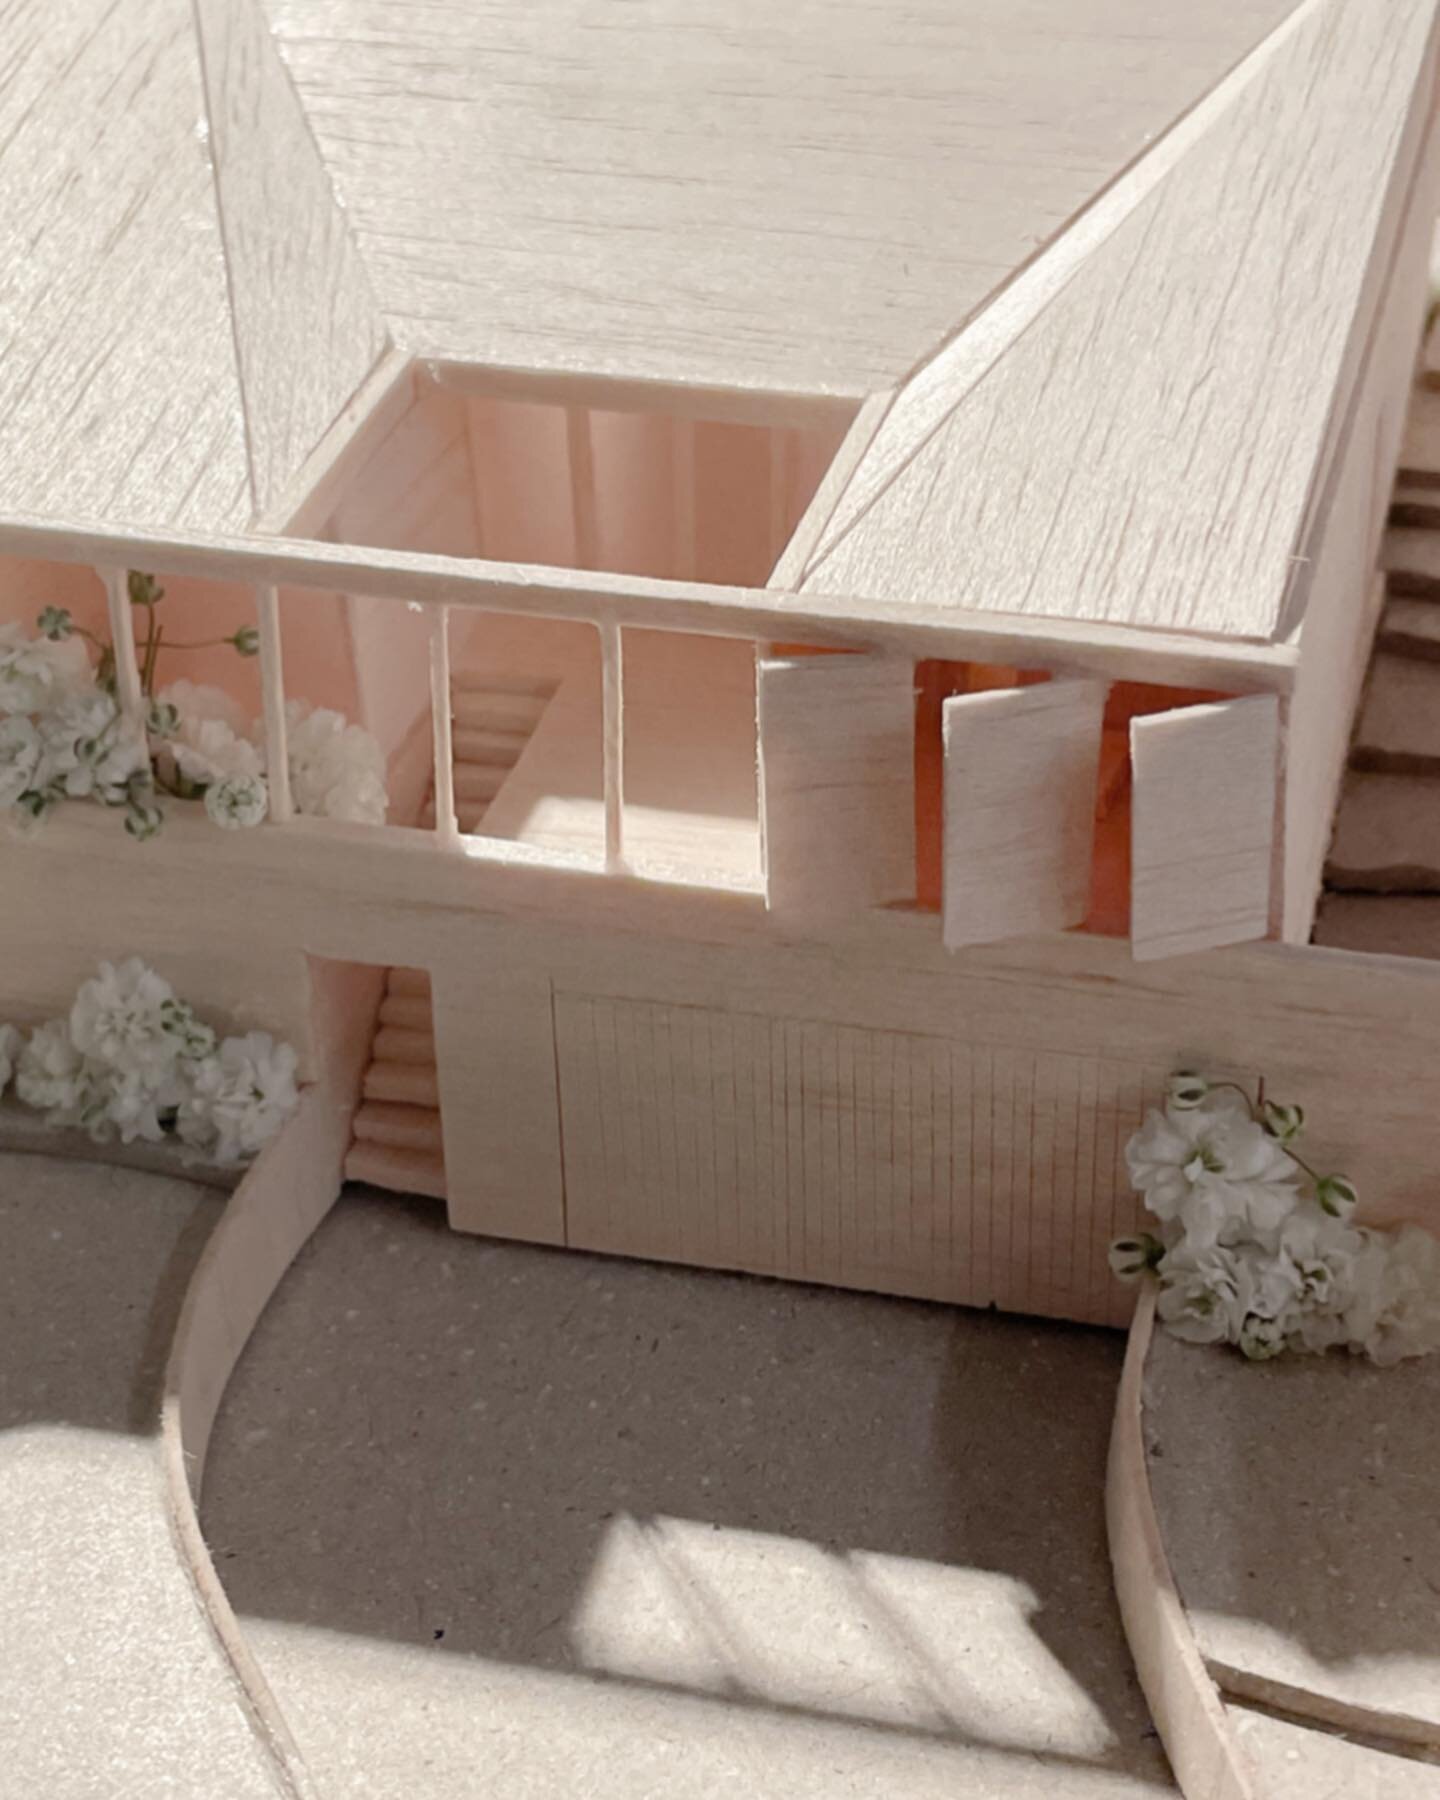 Work in progress.  A sketch model for a house in Port Hacking.  The house centres around an elevated courtyard facing the street, creating both a staged arrival, and allowing light and ventilation into the adjacent bedrooms and circulation spaces...
